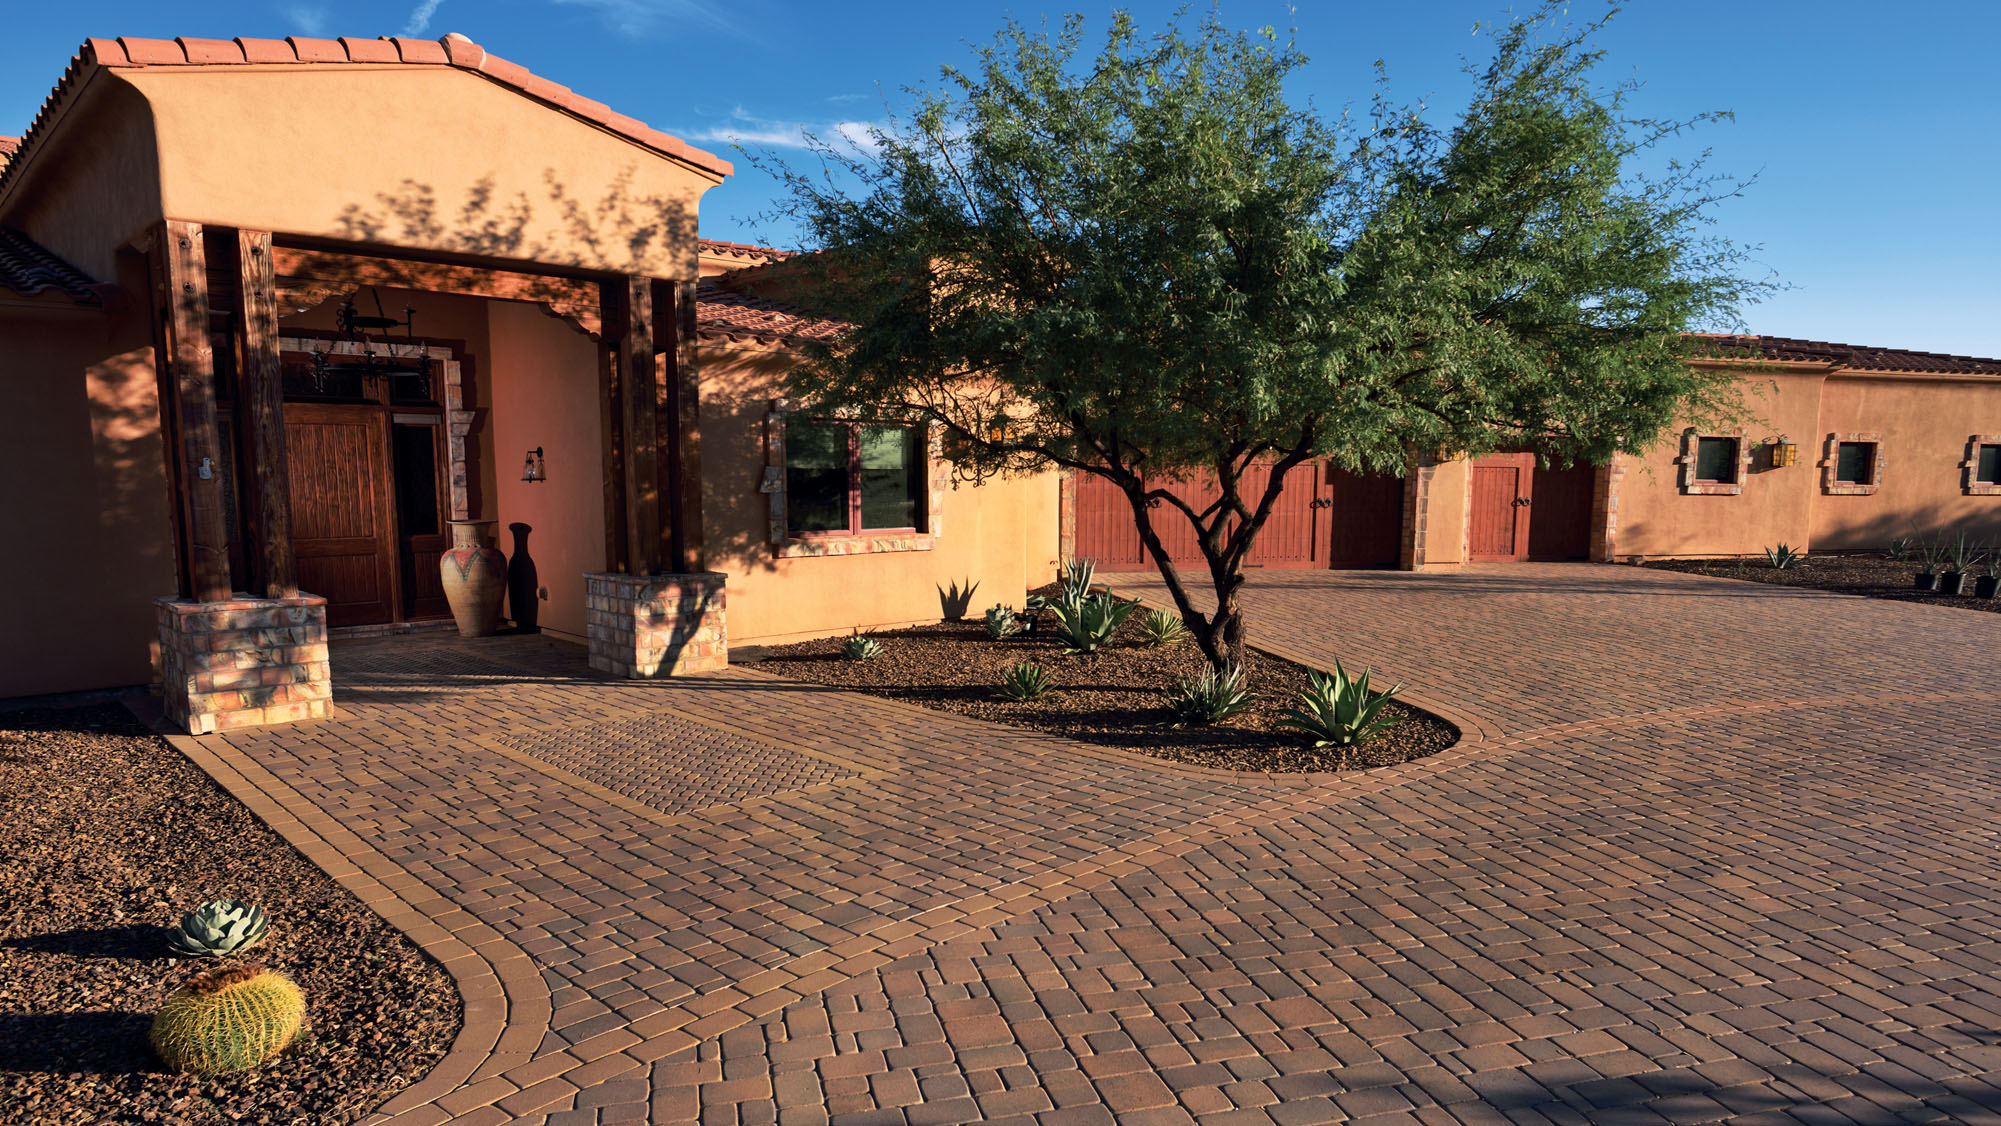 Home enterance and circular driveway in Standard Pavers, Territorial color blend.